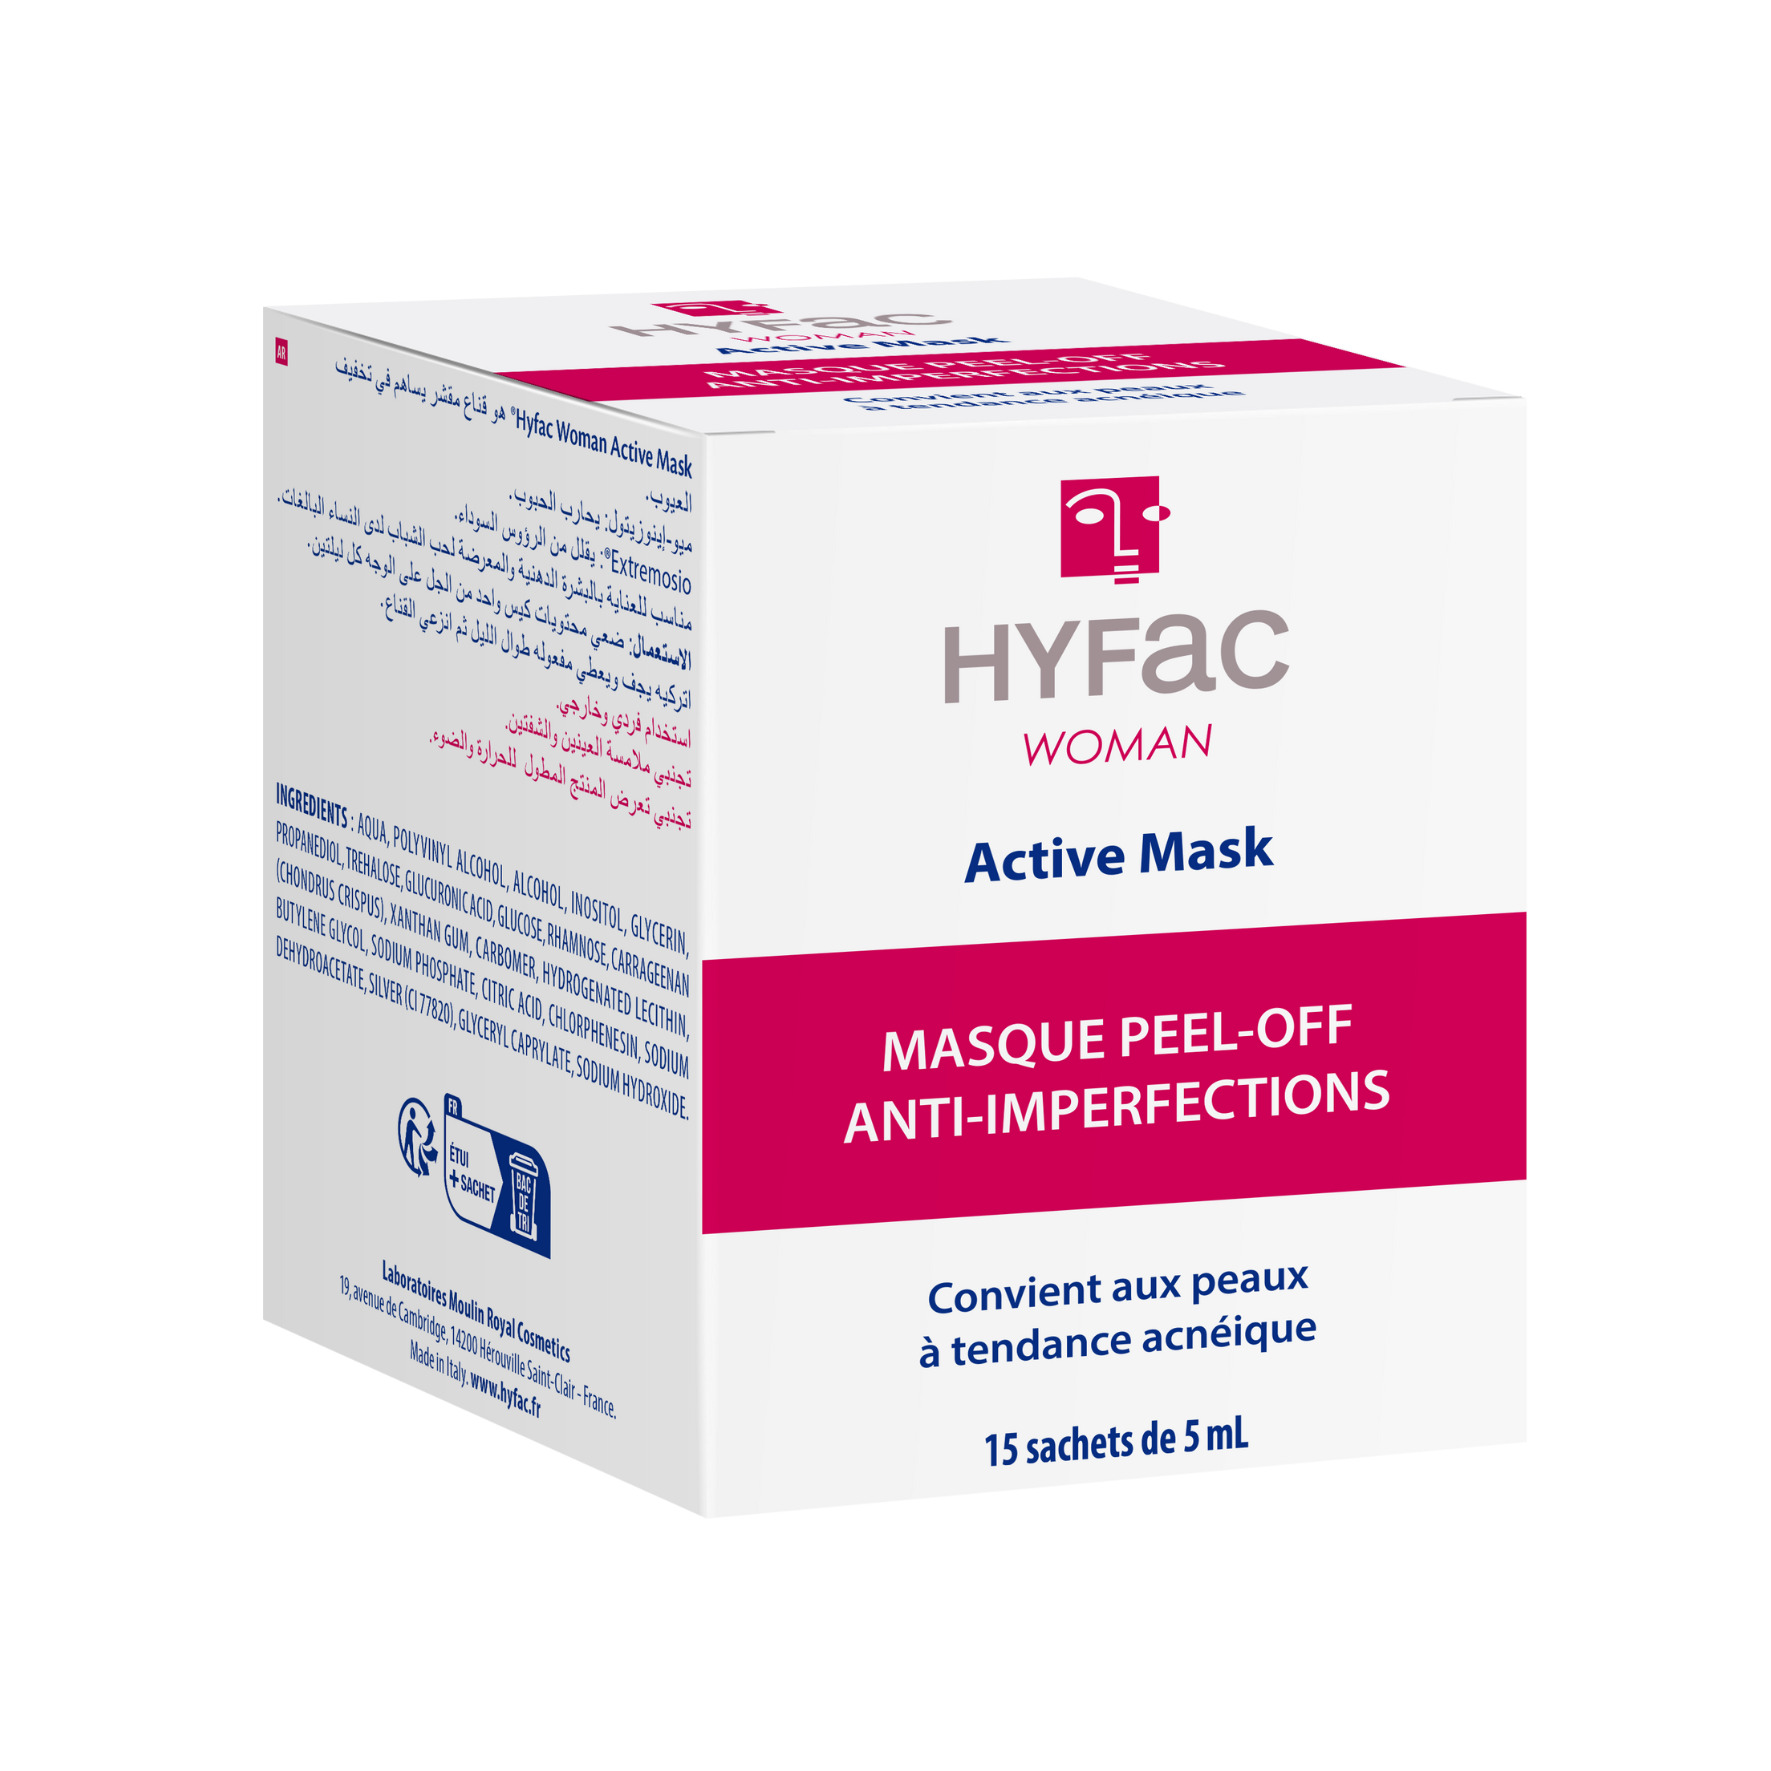 HYFAC WOMAN Active Mask acne treatment for women